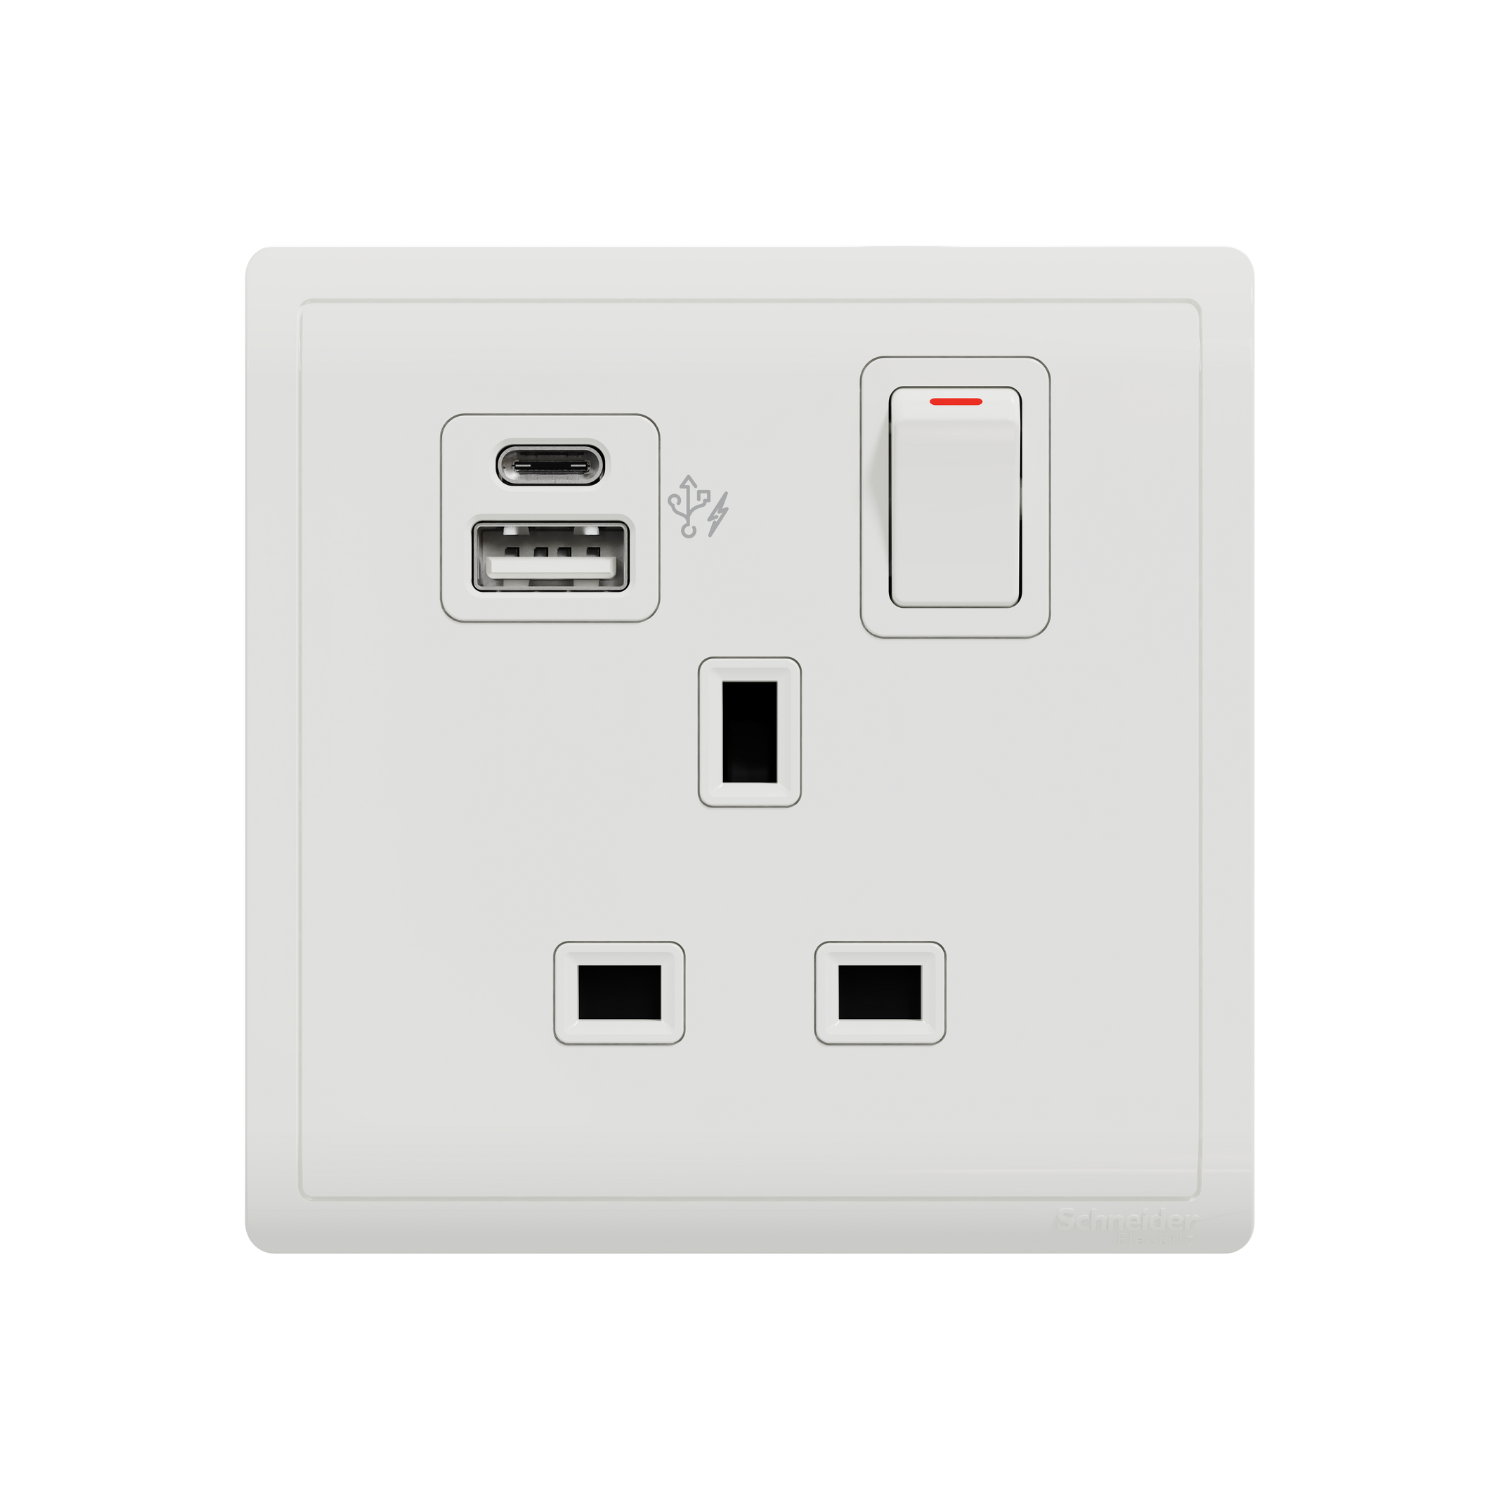 PIENO 13A 1 Gang Double Pole Switched Socket with 2 Gang USB Fast Charger Socket Type A+C, White